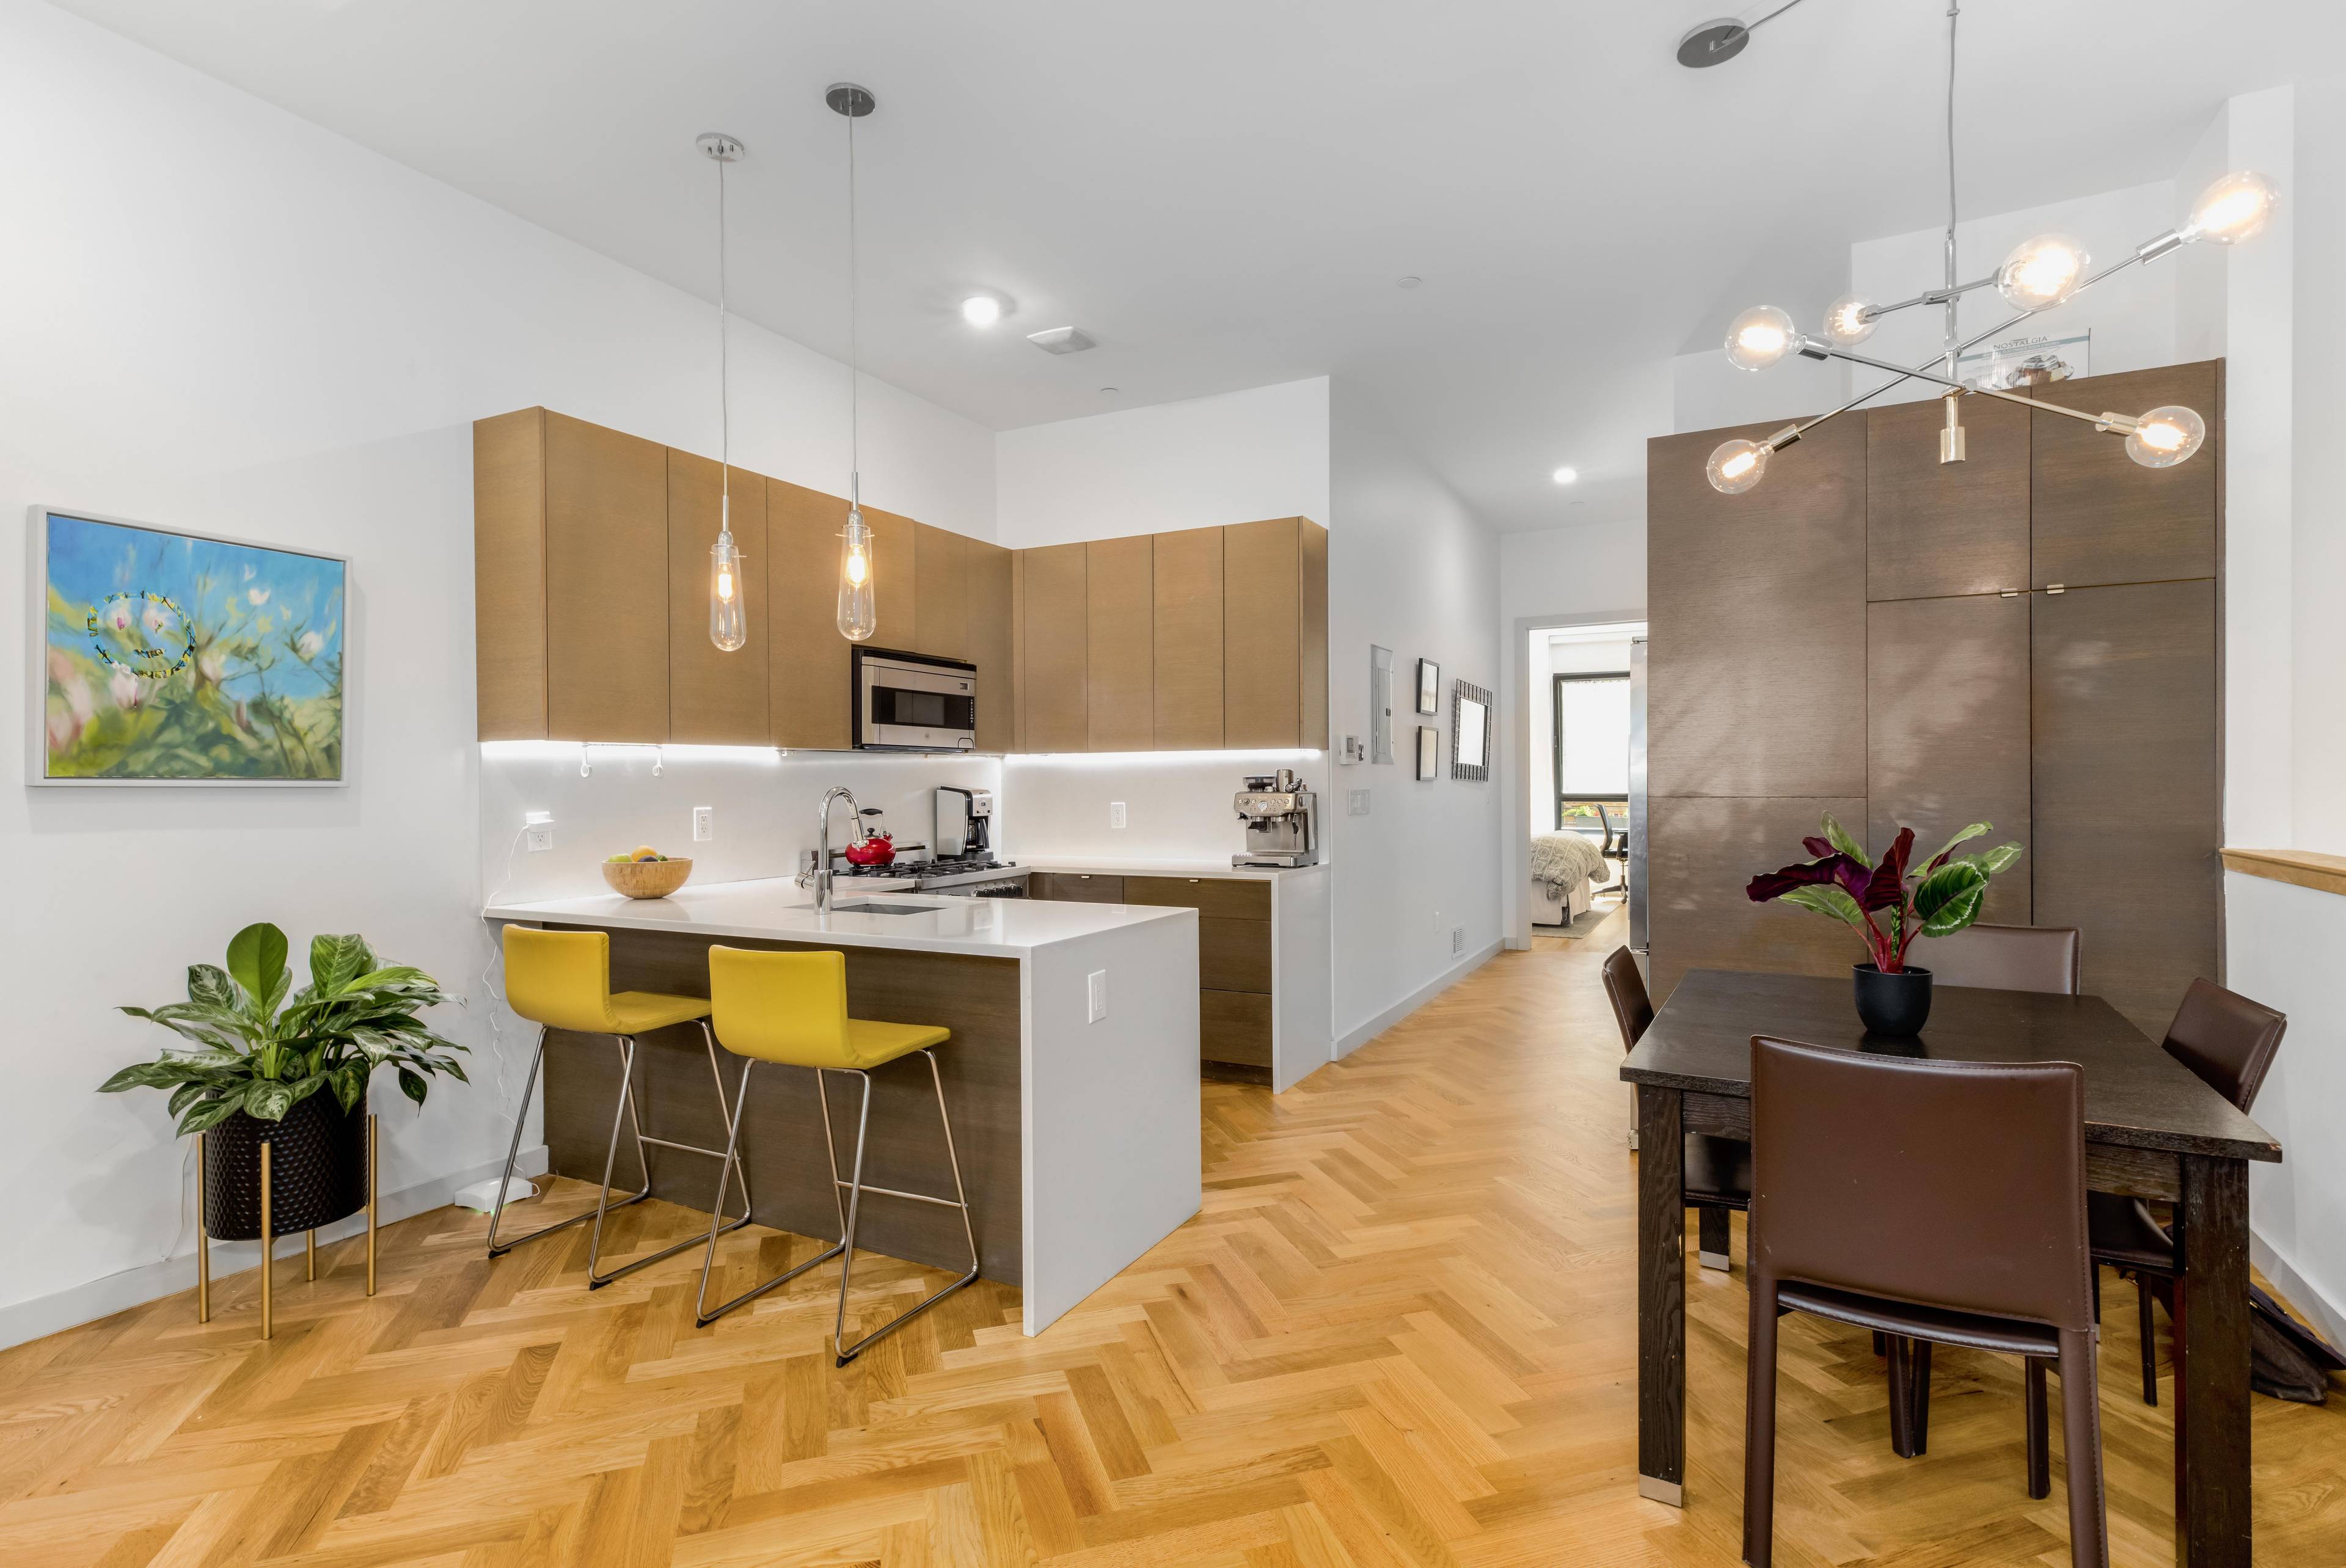 Make your Brooklyn backyard dreams a reality in this sun filled three bedroom, two and a half bathroom duplex condominium with two beautifully landscaped private outdoor spaces.